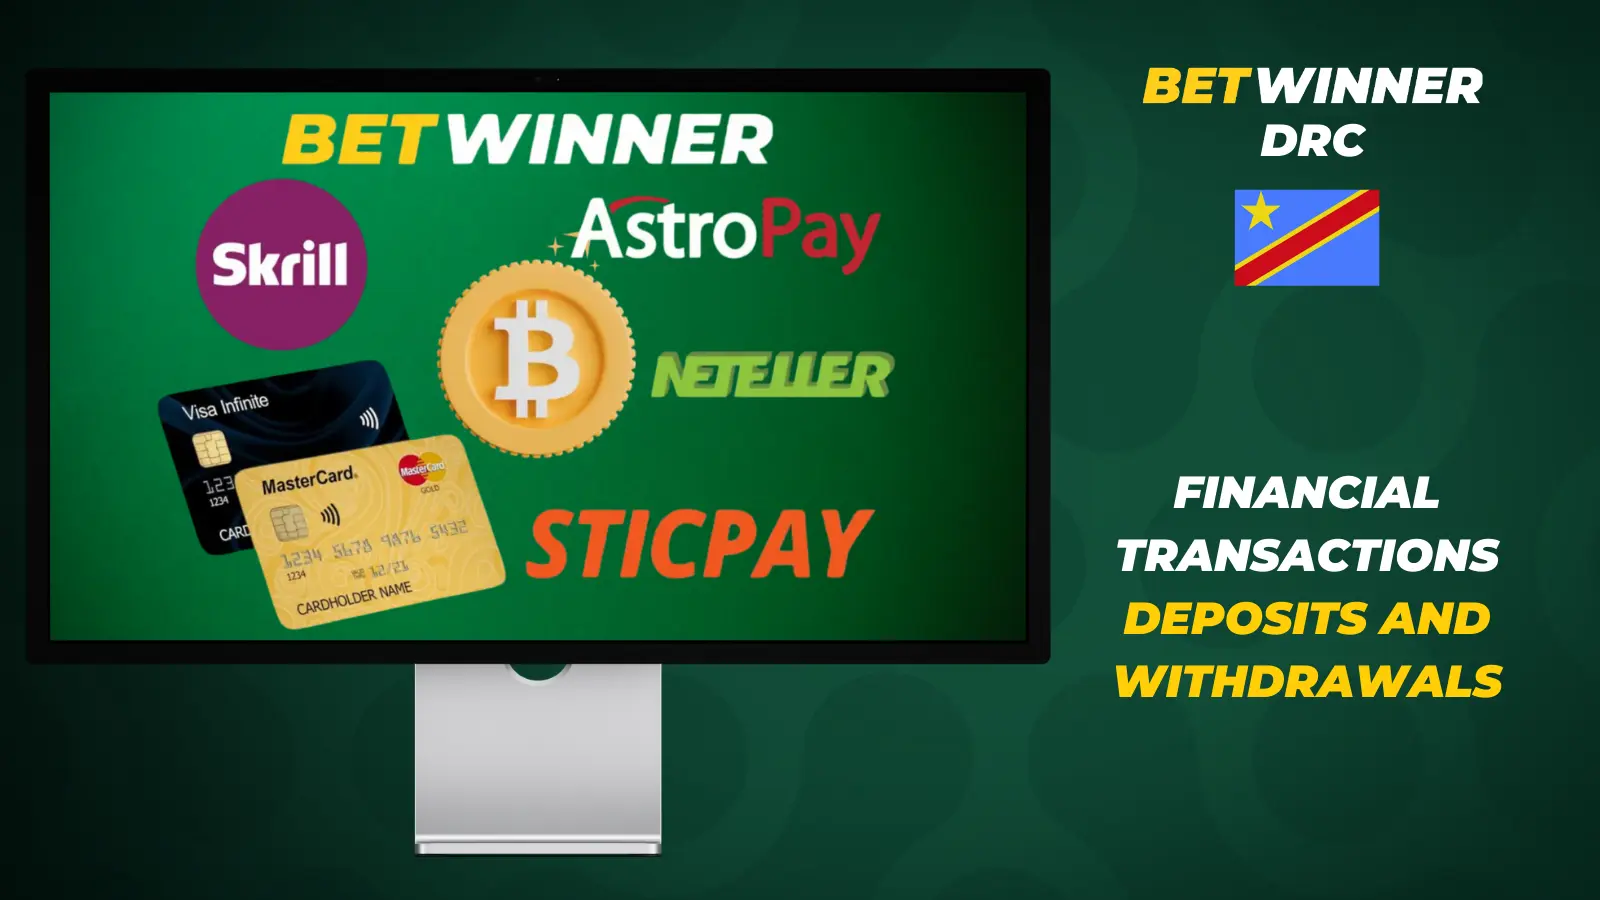 10 Essential Strategies To Online Betting with Betwinner